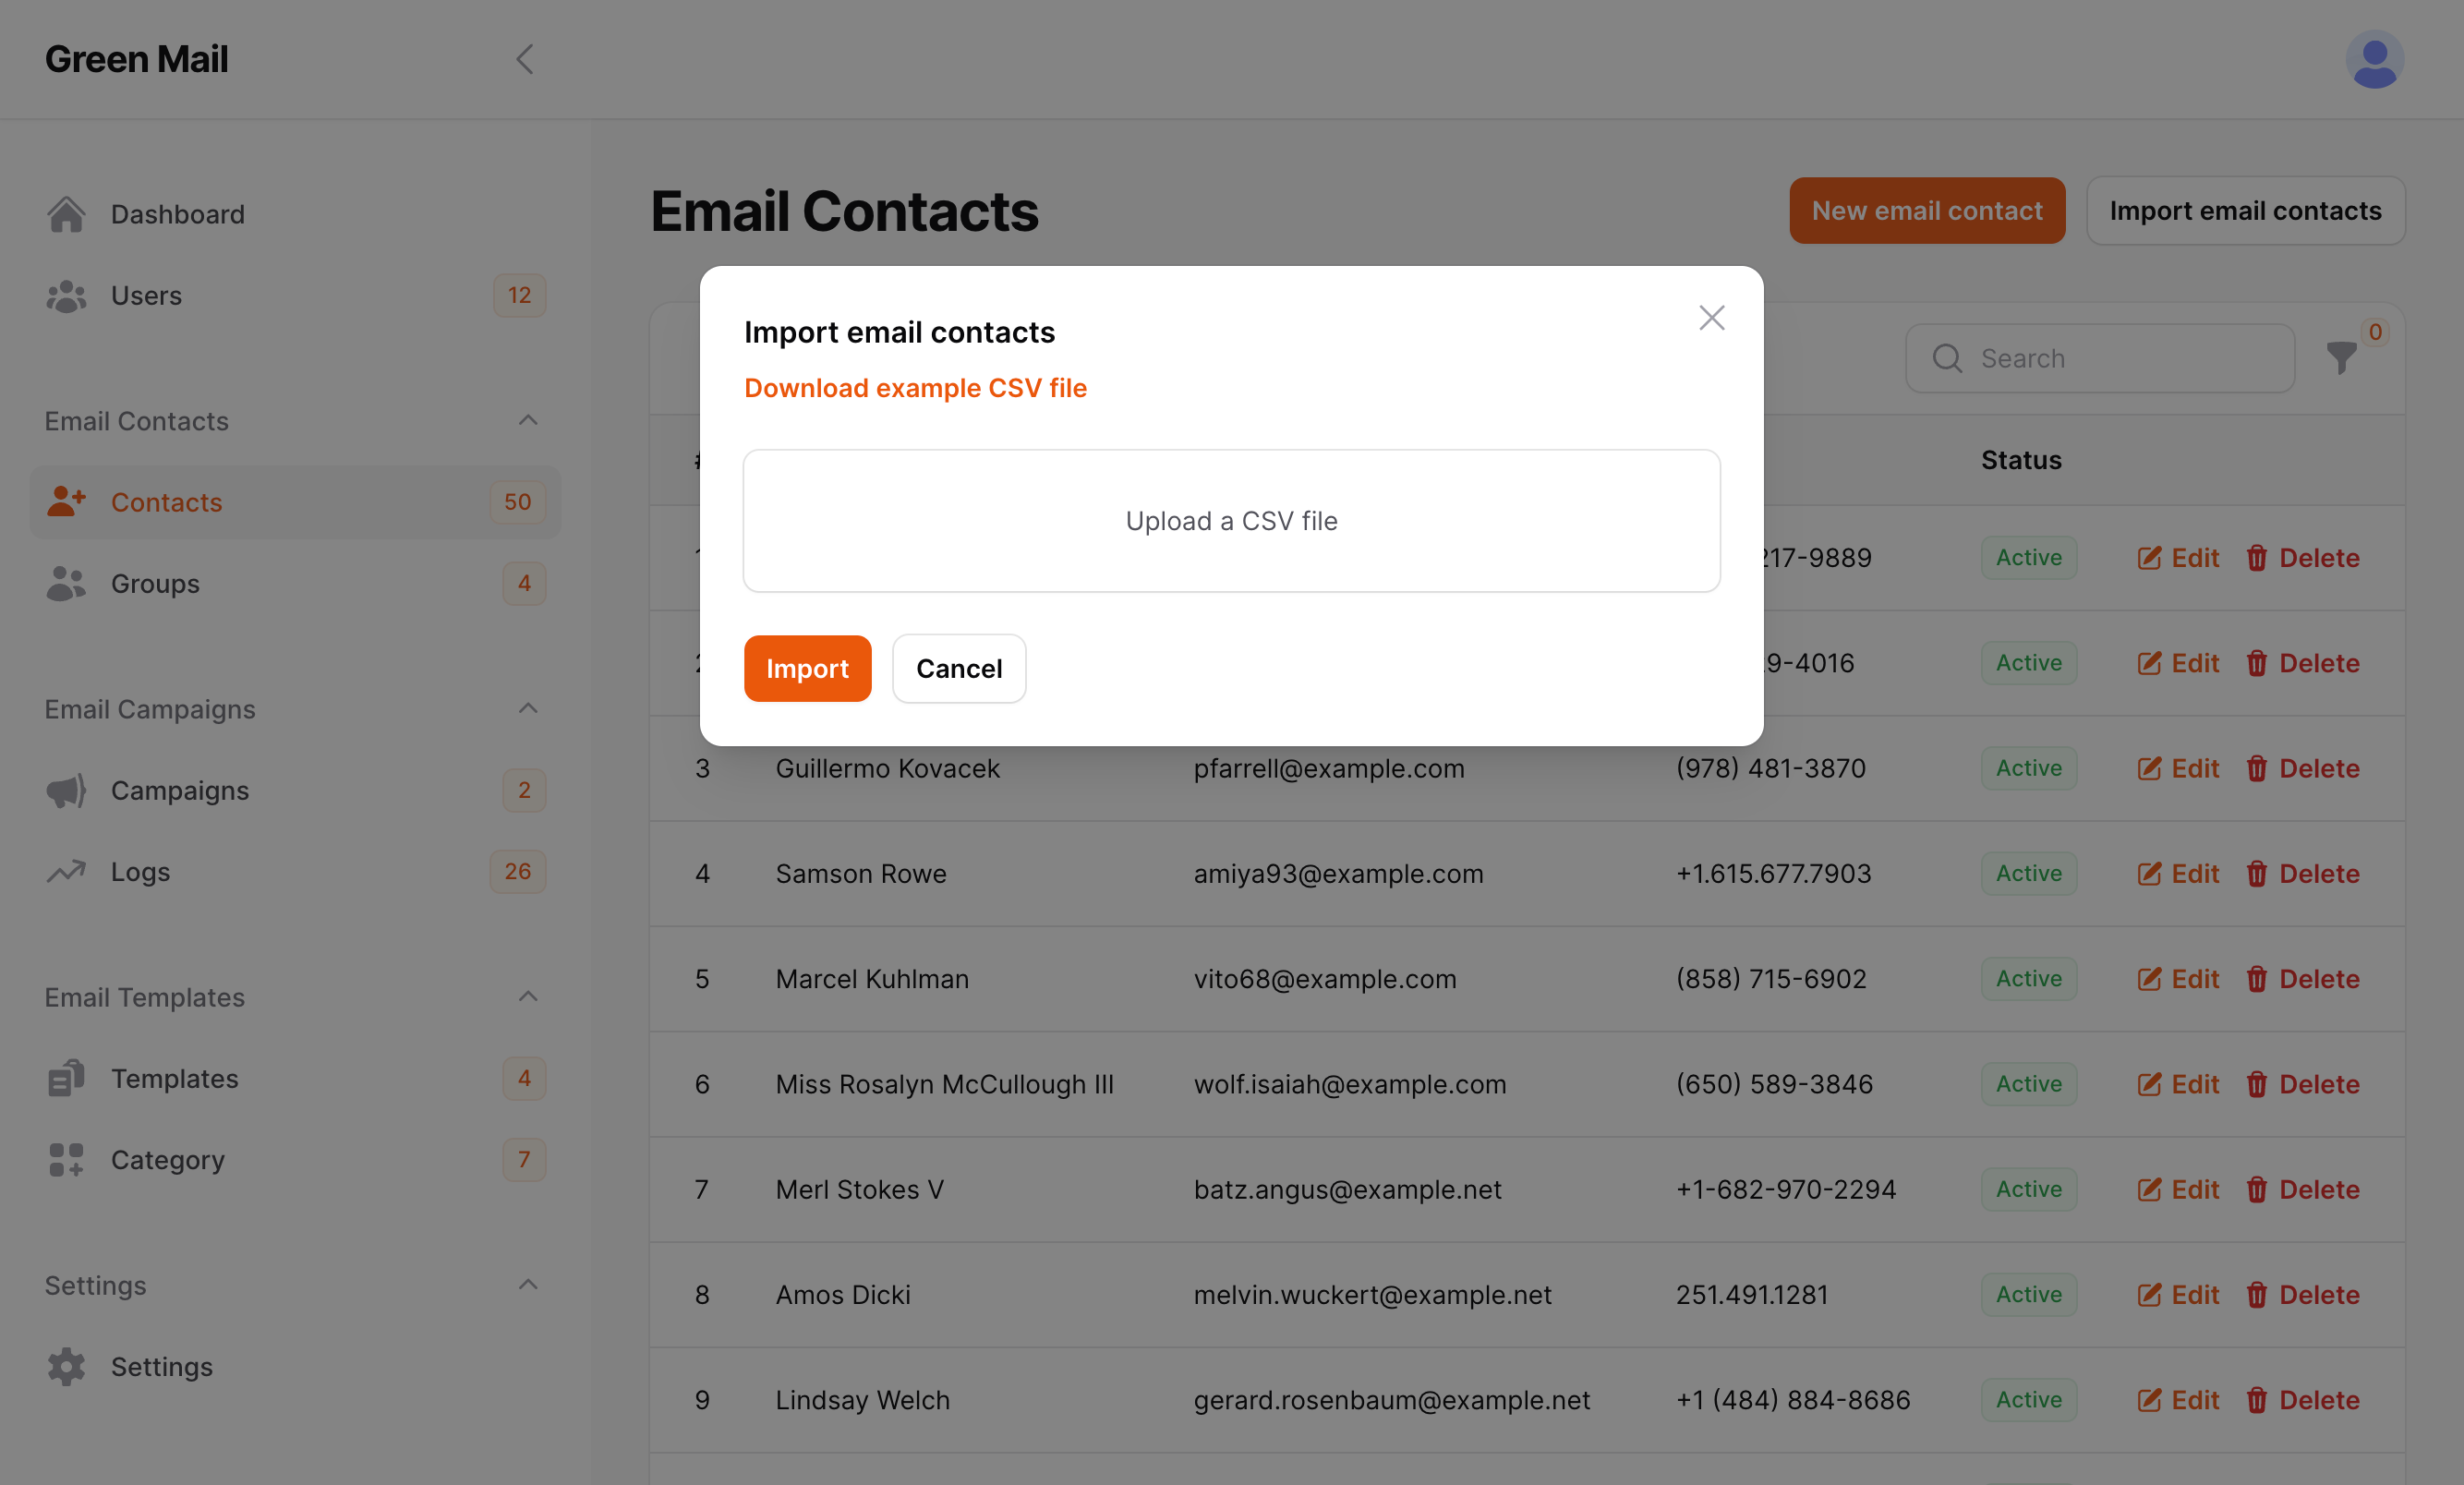 Efficiently manage your contacts for seamless email communication